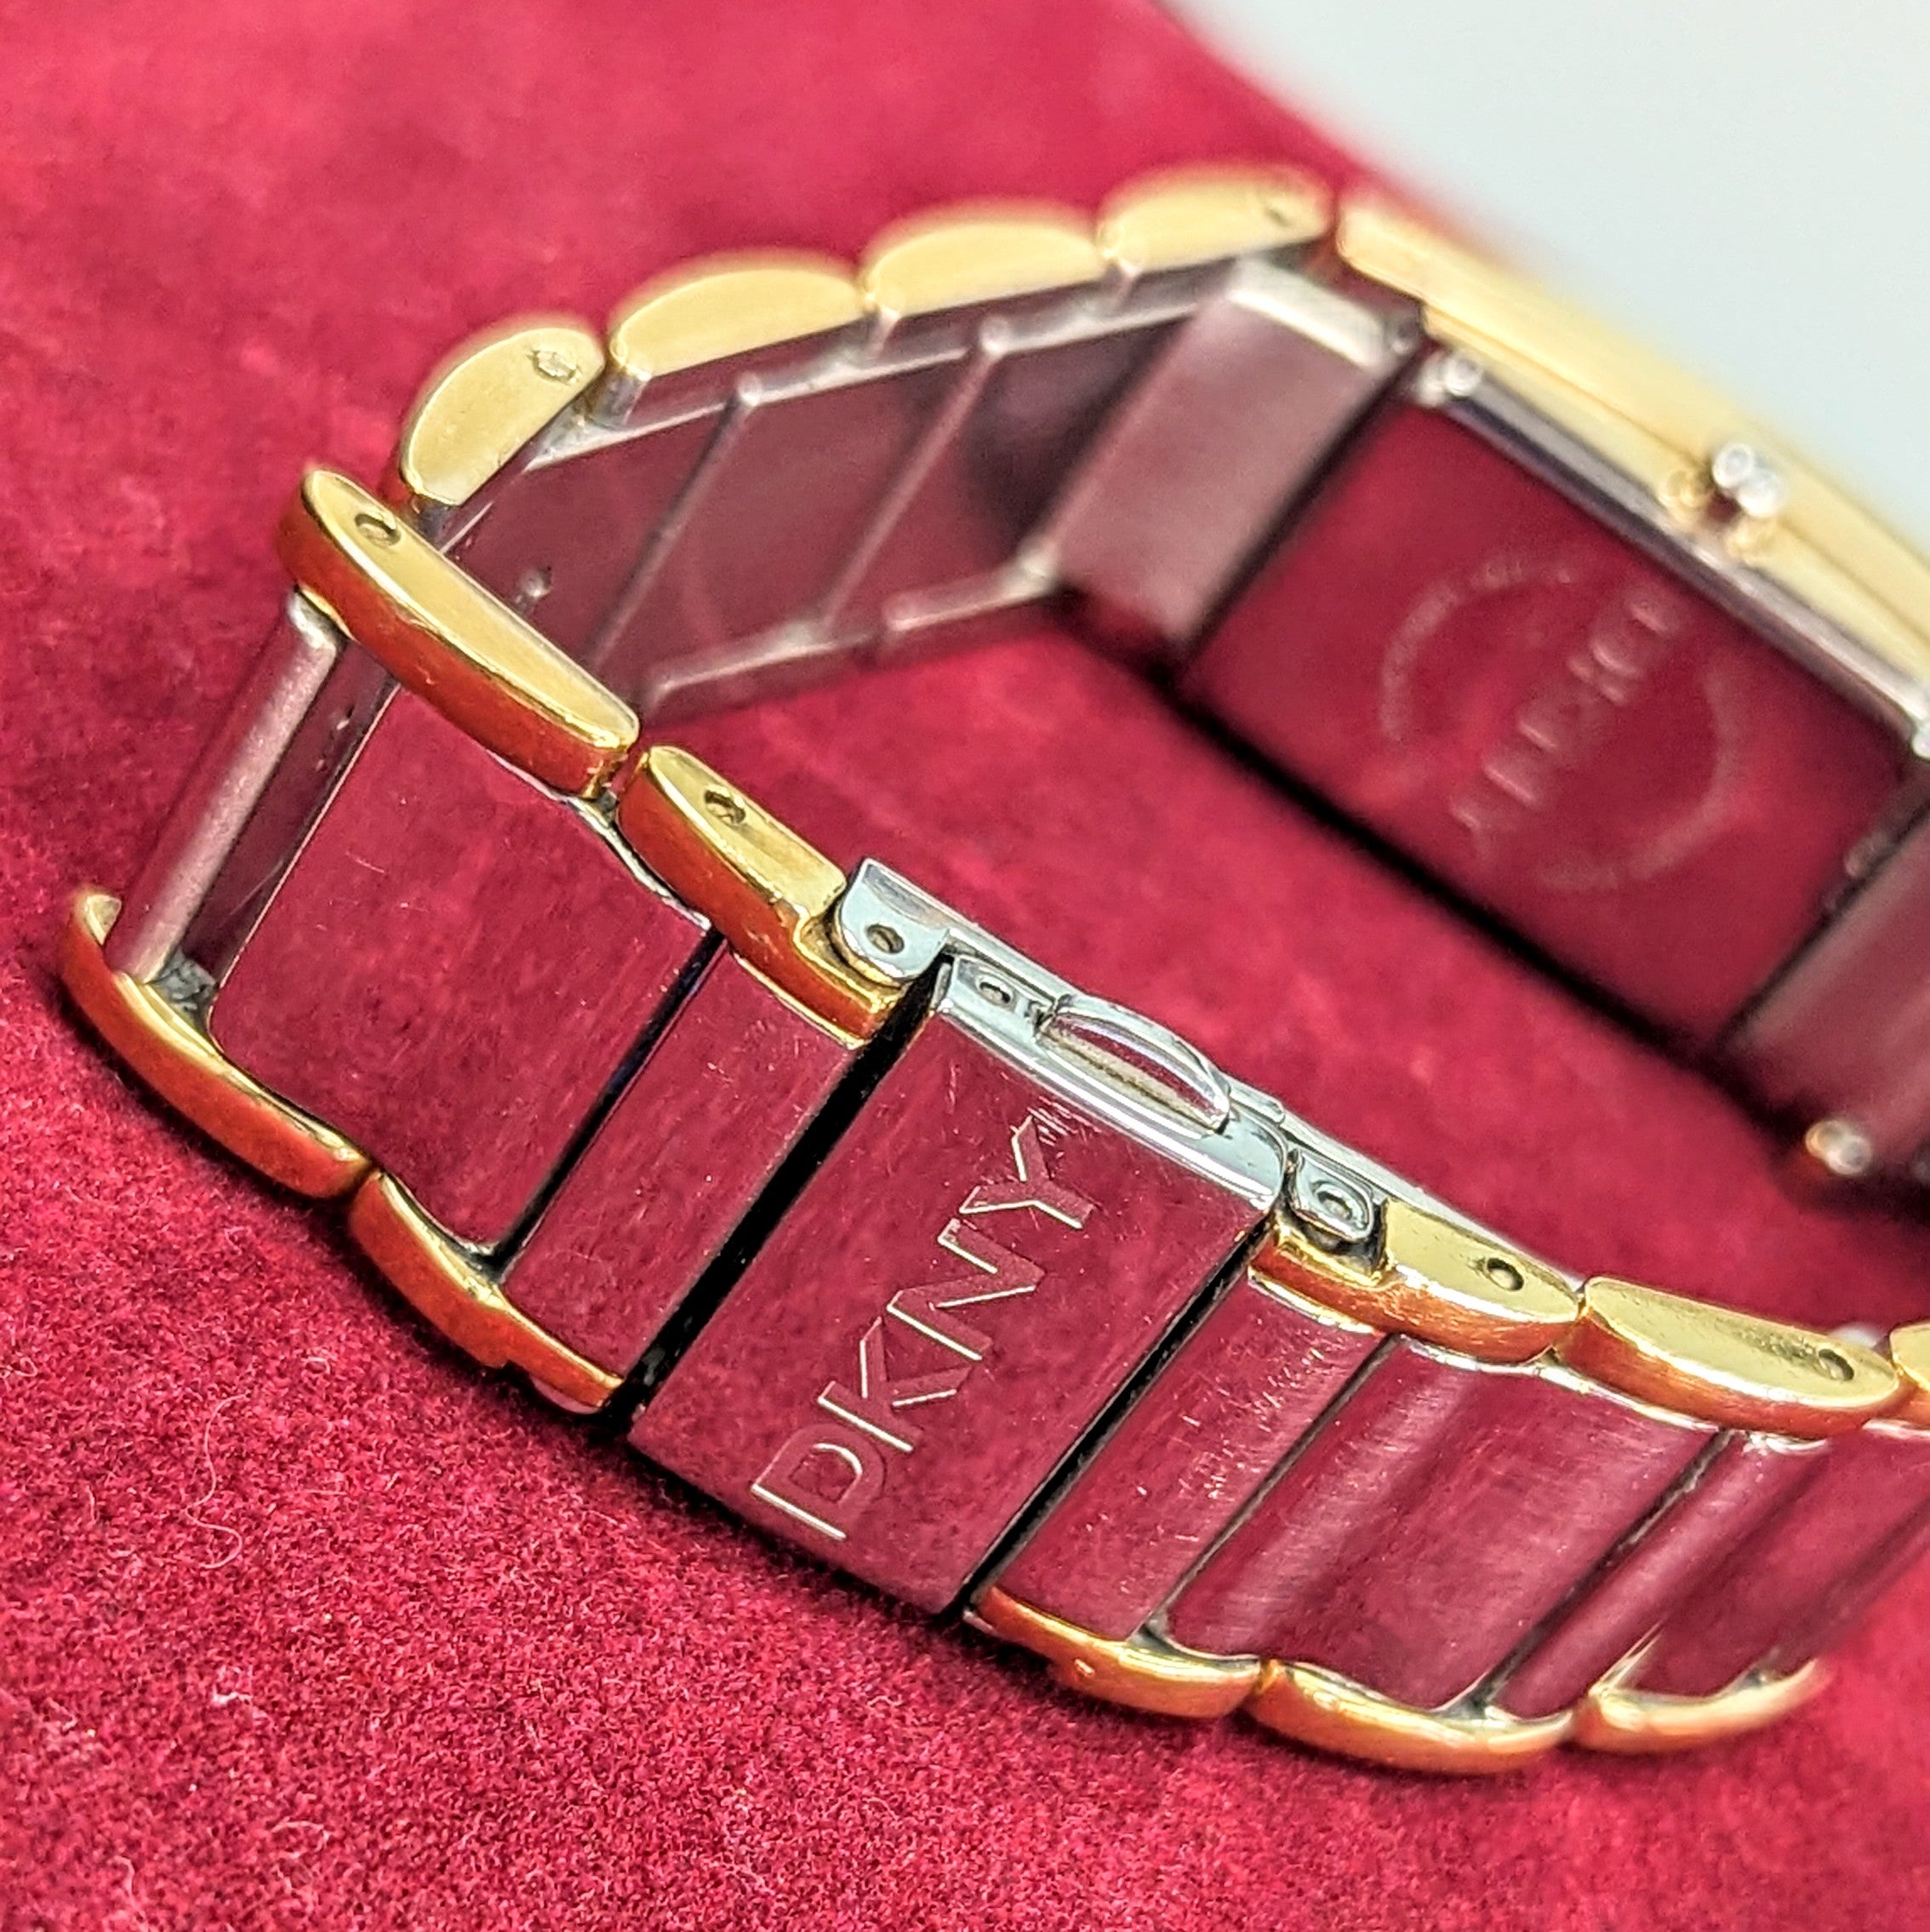 Dkny Pave Bangle Bracelet, Created for Macy's | CoolSprings Galleria